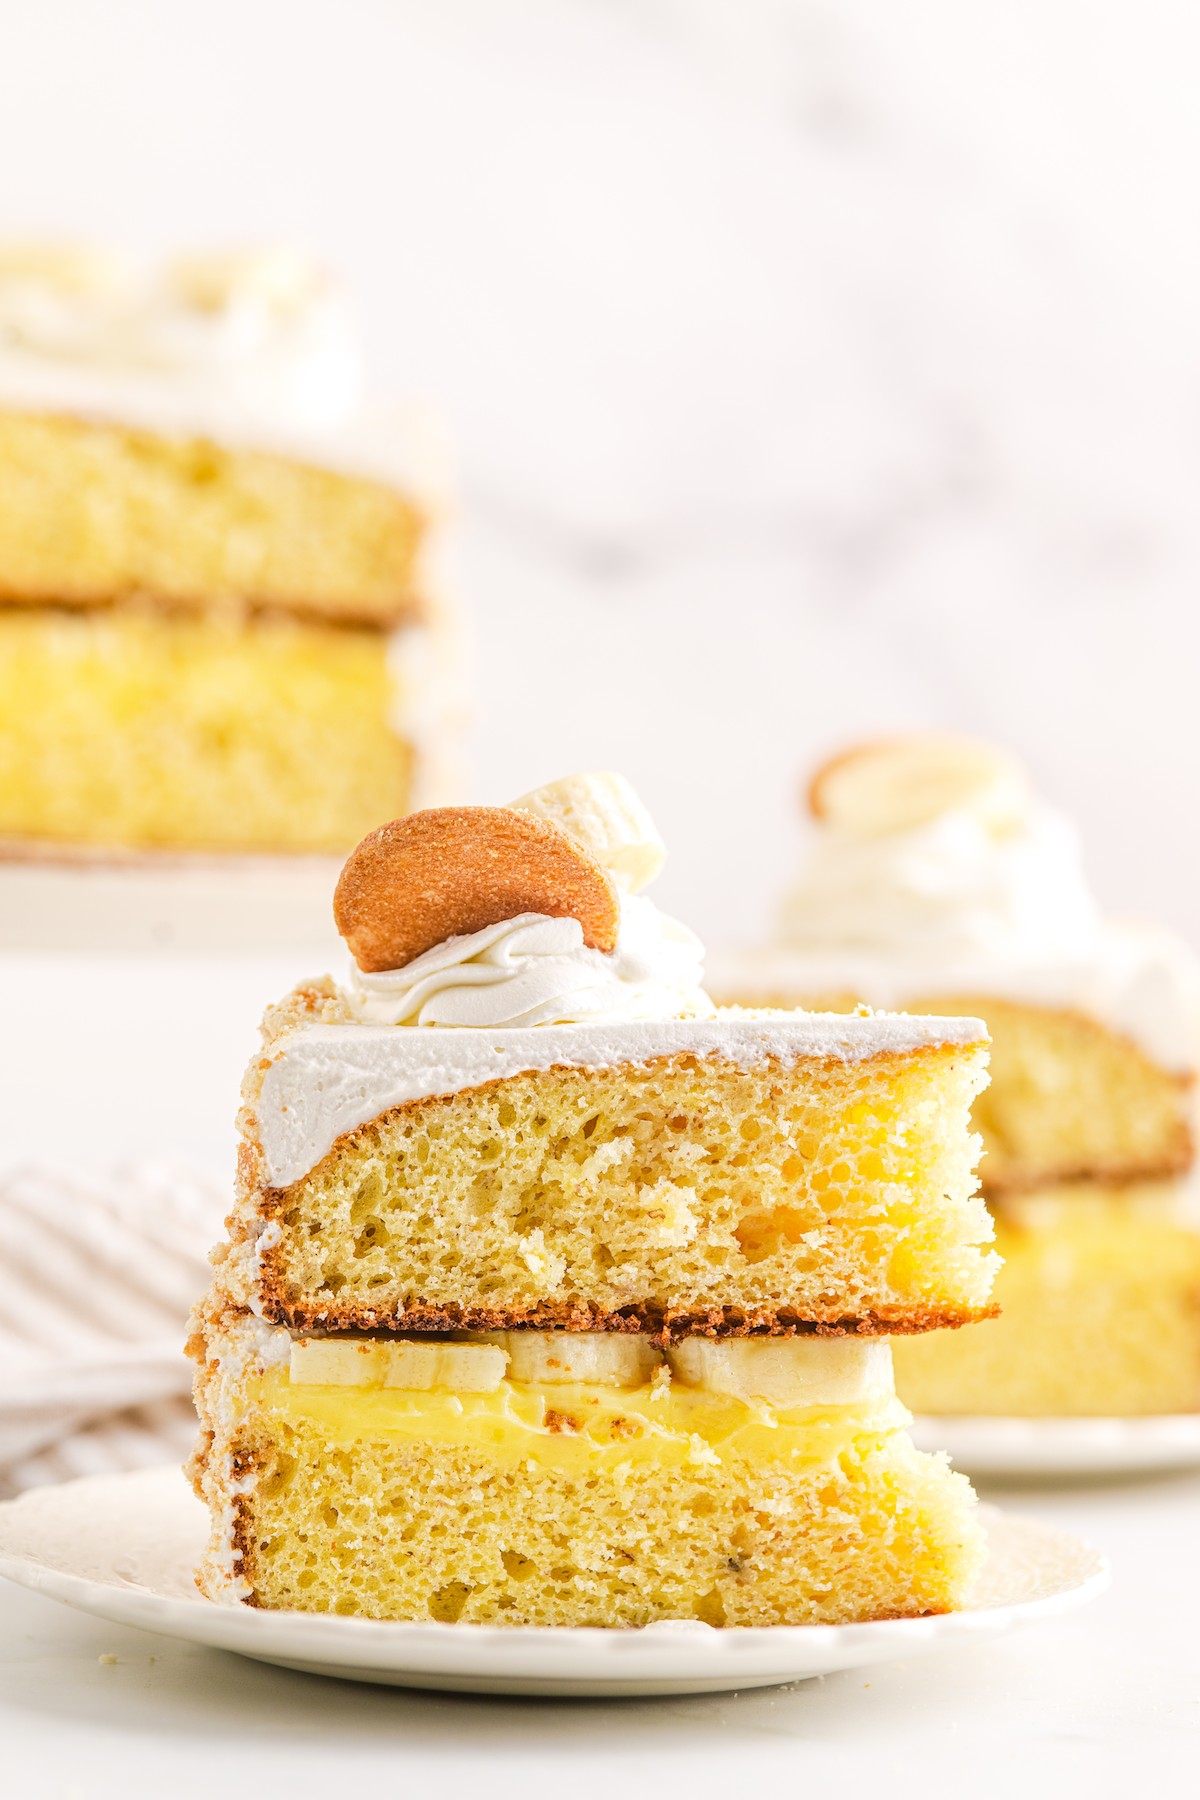 Side view of a slice of banana pudding cake, showing the layers of cake, pudding, bananas, and whipped cream.